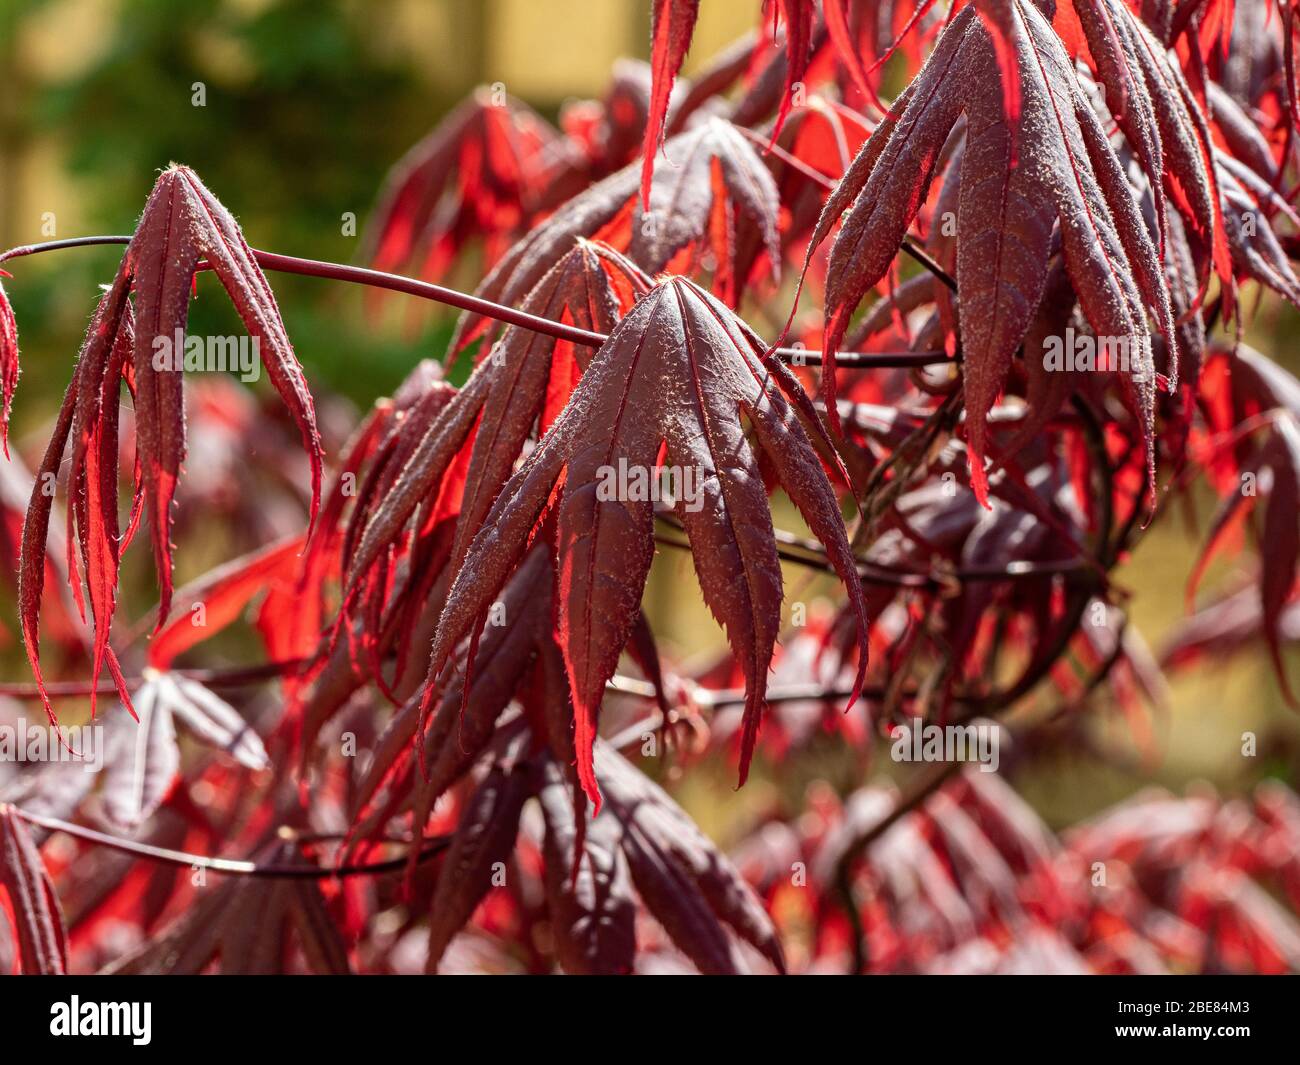 A close up of the blood red red foliage of Acer palmatum Bloodgood with sunlight shining through it Stock Photo